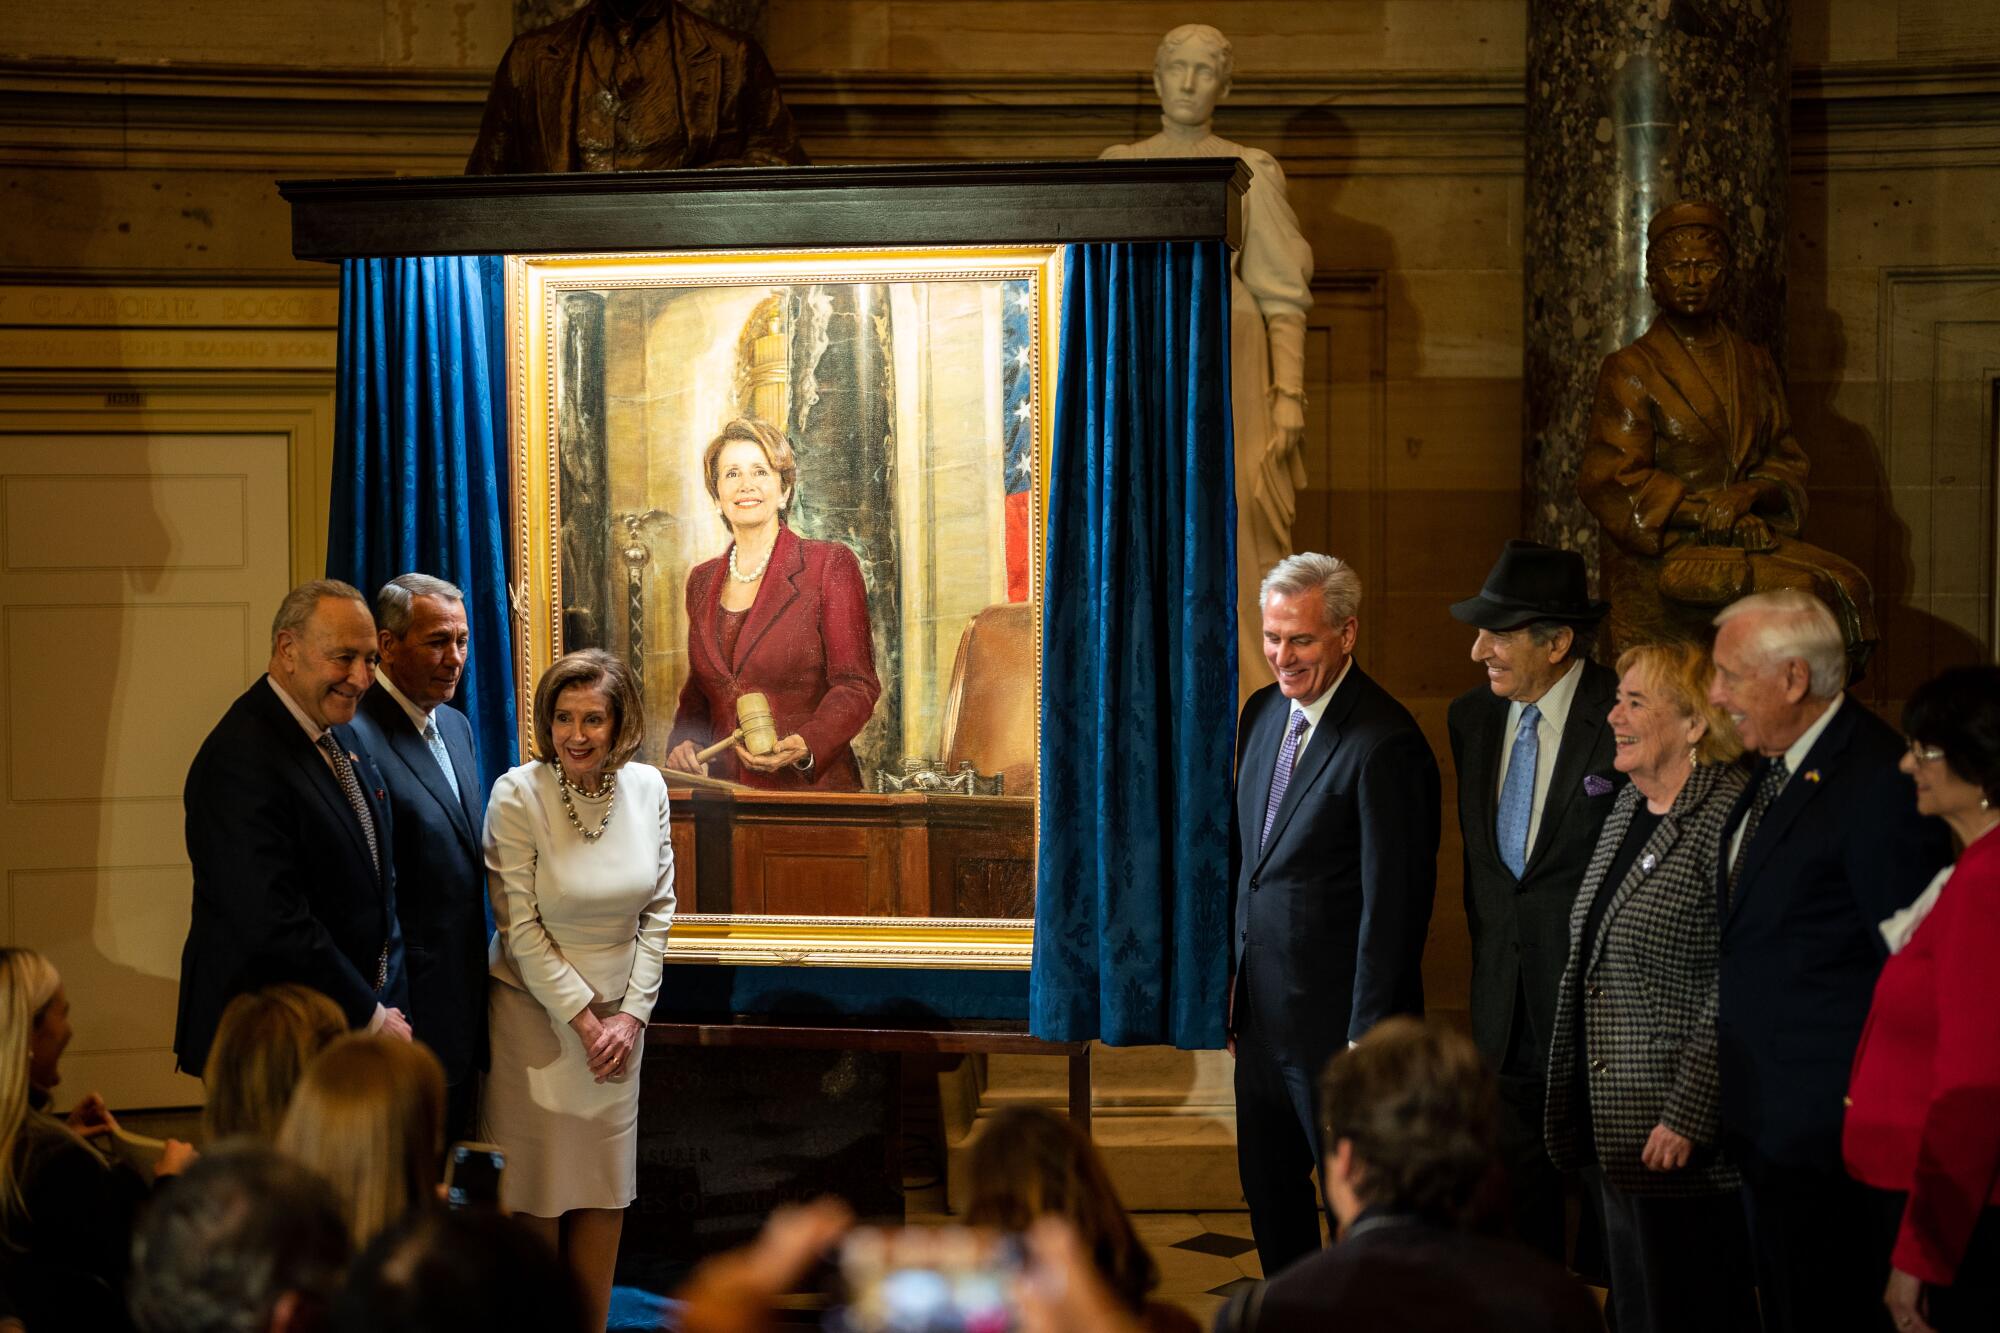 Speaker of the House Nancy Pelosi poses for photos with others near a painting of her in an ornate room.